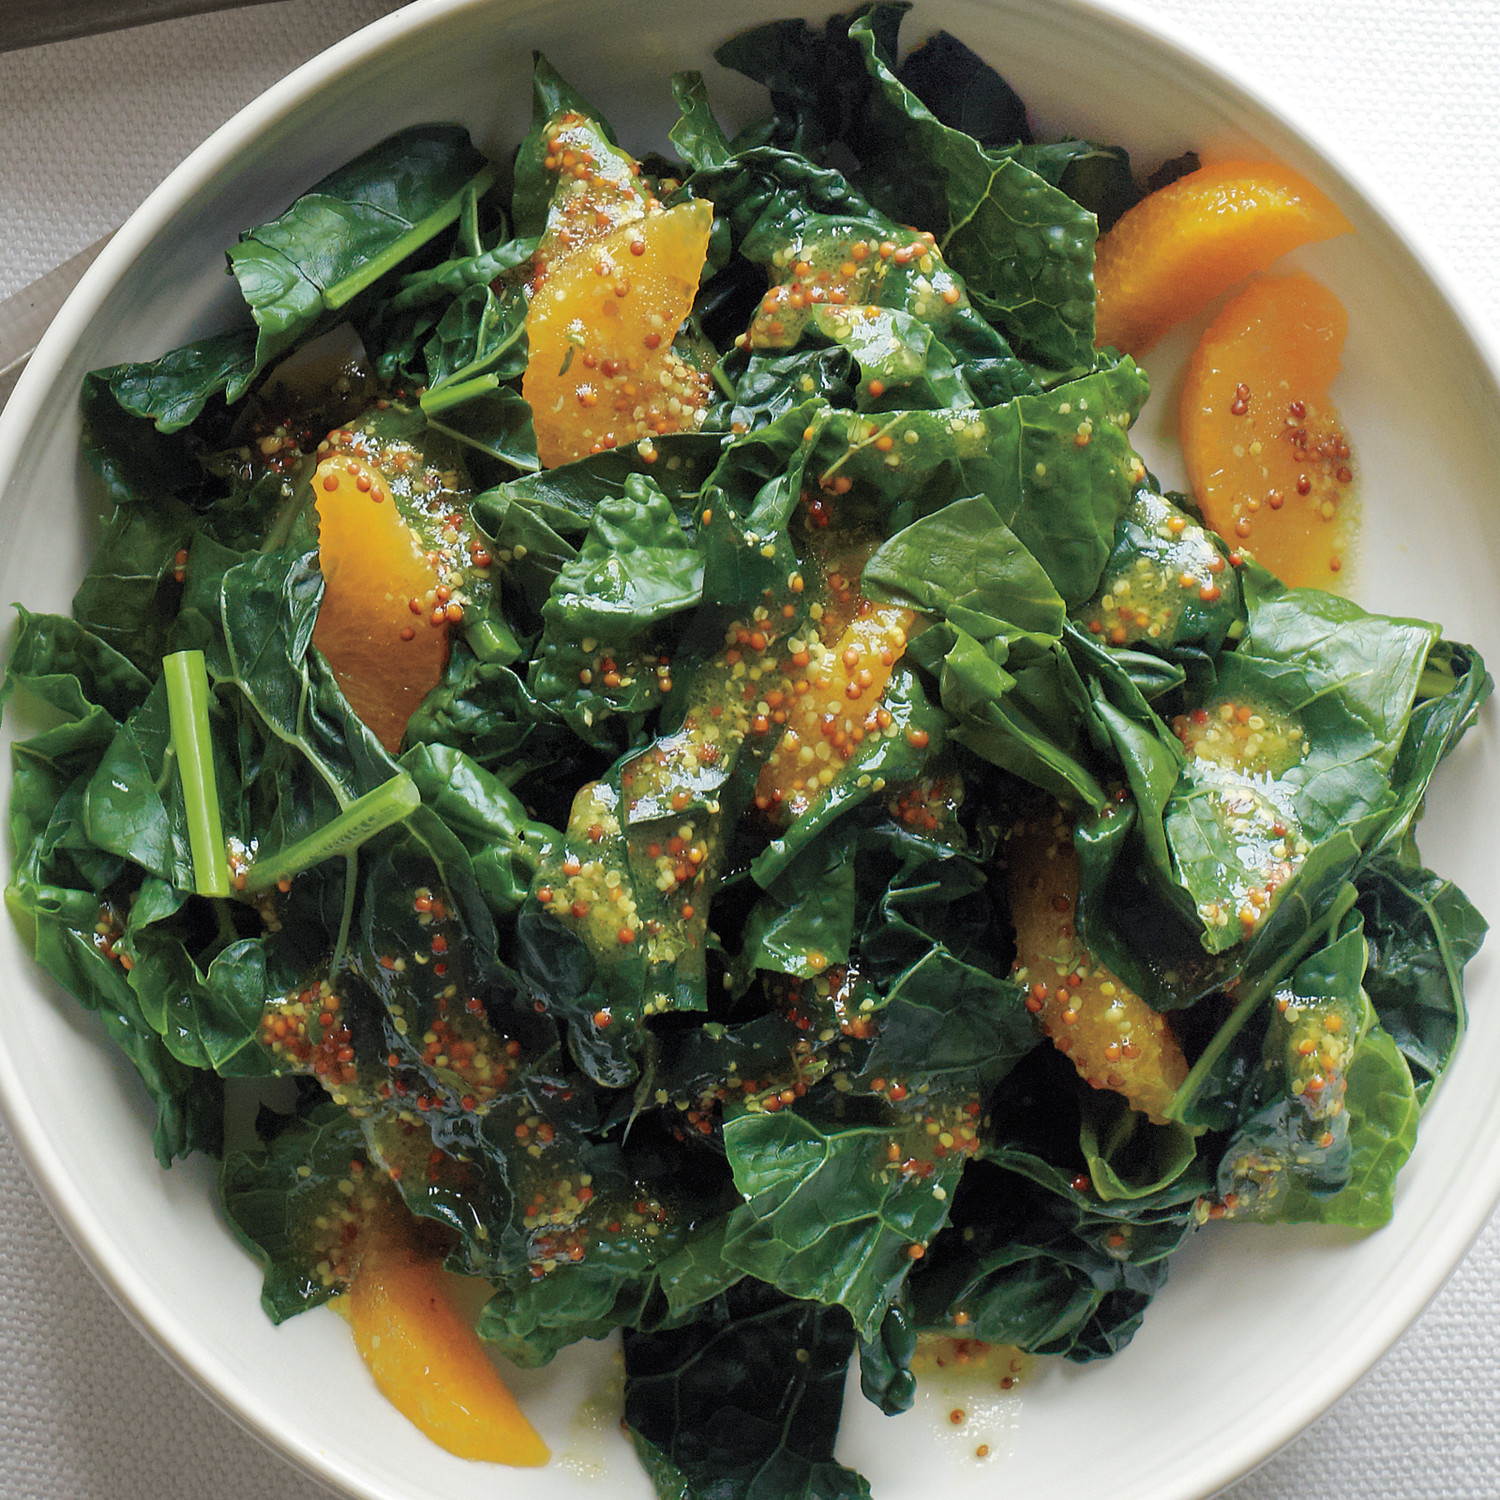 Kale with Oranges and Mustard Dressing